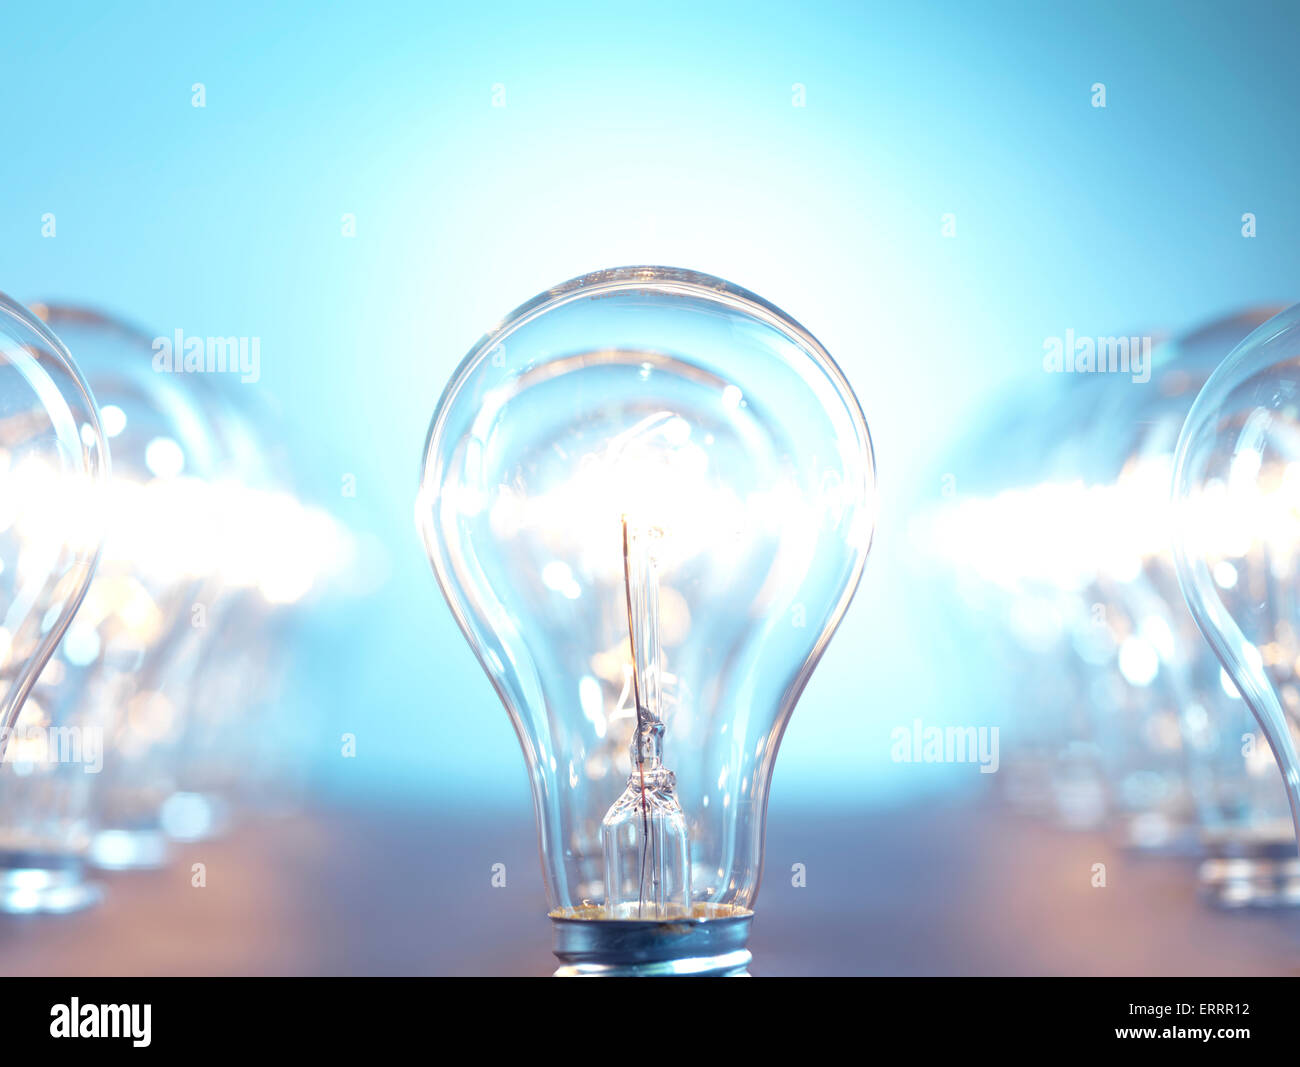 Closeup of lit up incandescent light bulbs on bright blue background. Power consumption concept. Stock Photo